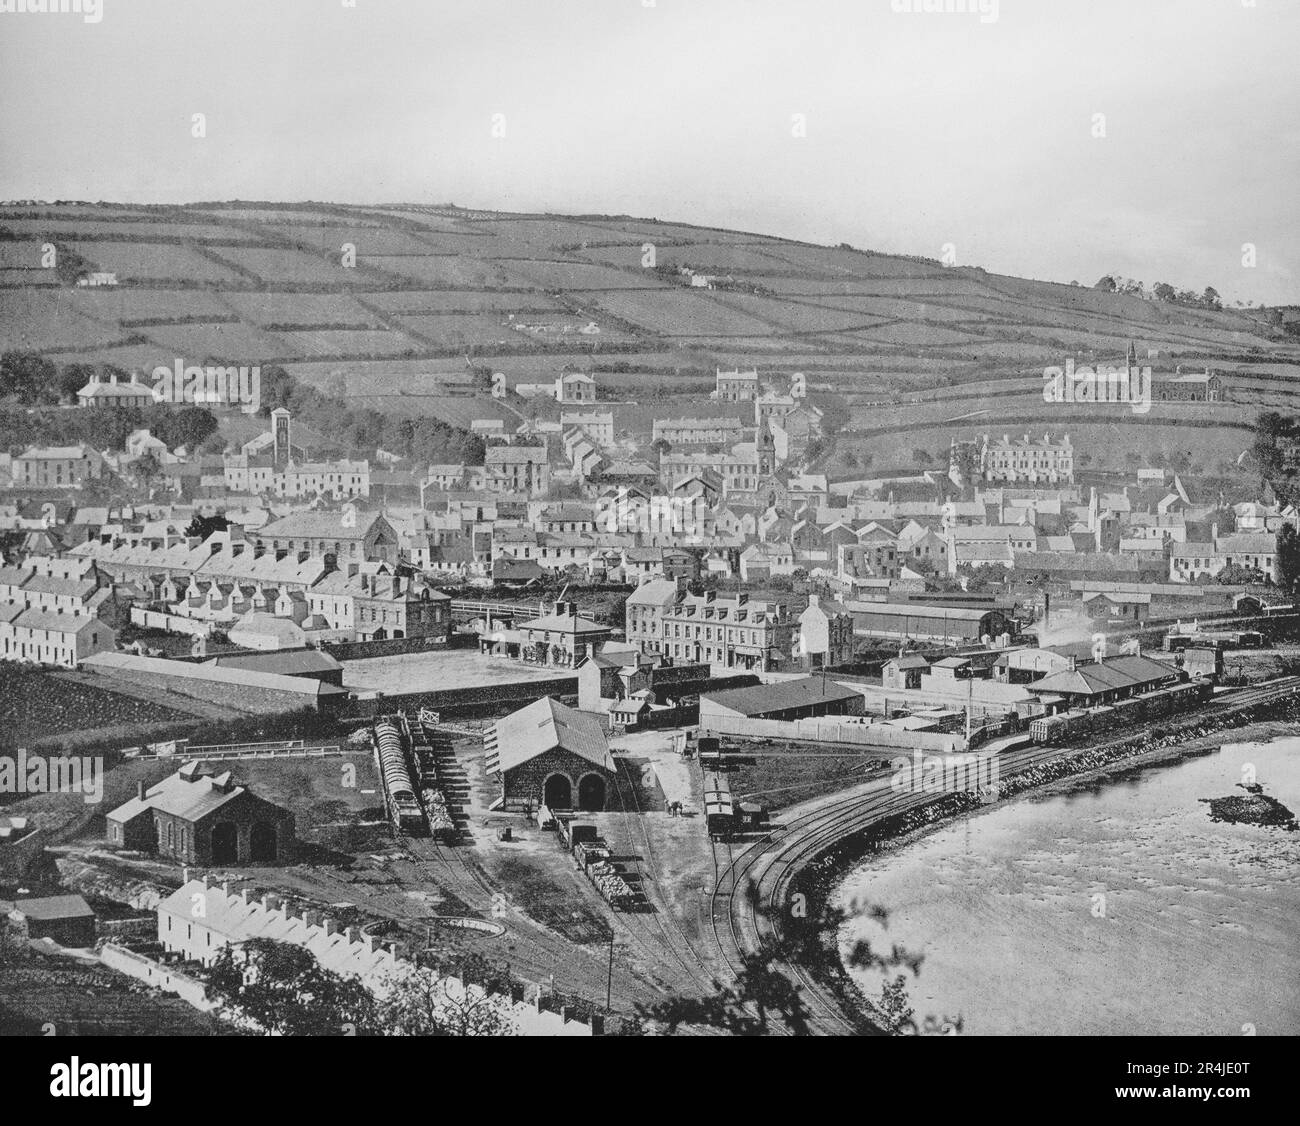 A late 19th century view of Larne, a town on the east coast of County Antrim, Northern Ireland. In 1315, Edward the Bruce of Scotland (brother of Robert the Bruce, King of Scotland), saw Ireland as another front in the ongoing war against Norman England, landed at Larne with his 6000 strong army en route to conquer Ireland. Following the 17th century Union of the Crowns of Scotland, England and Ireland under James VI & I many more settlers arrived in Ulster via Larne during the Plantation of Ulster. Later, during the 18th century many Scots-Irish emigrated to America from the port of Larne. Stock Photo